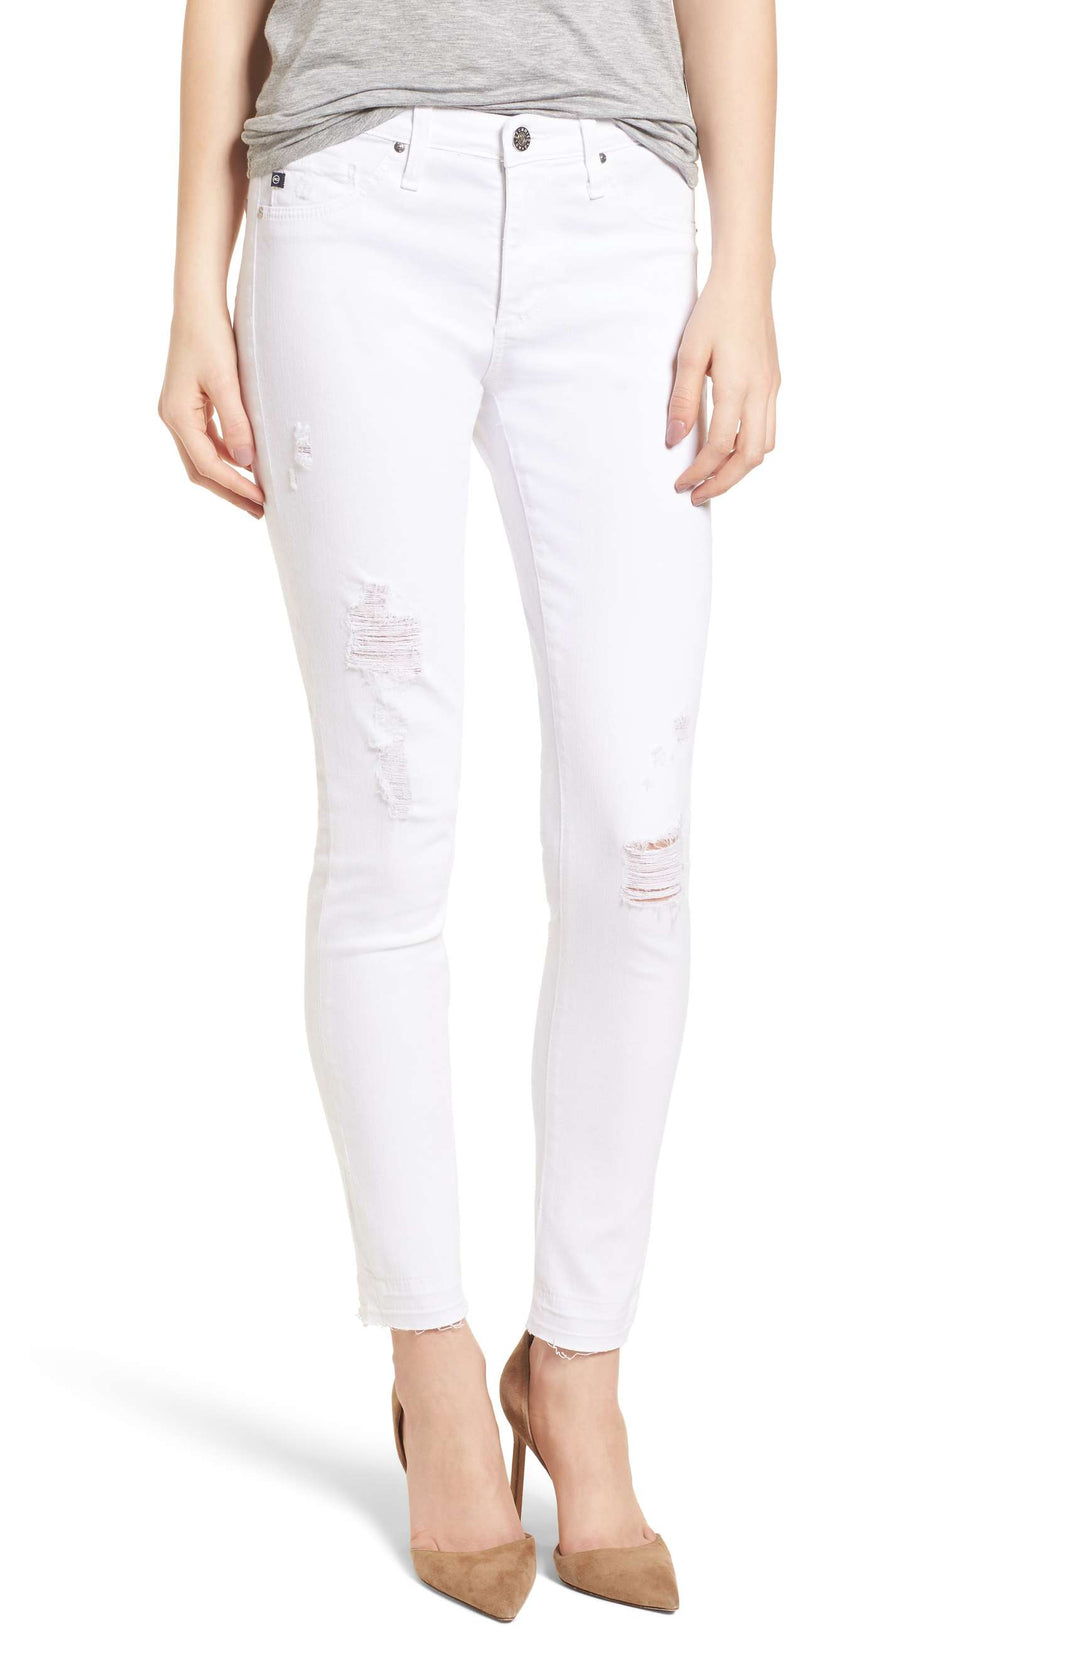 AG Farrah High-rise Skinny Ankle Jeans / EQUATION Boutique